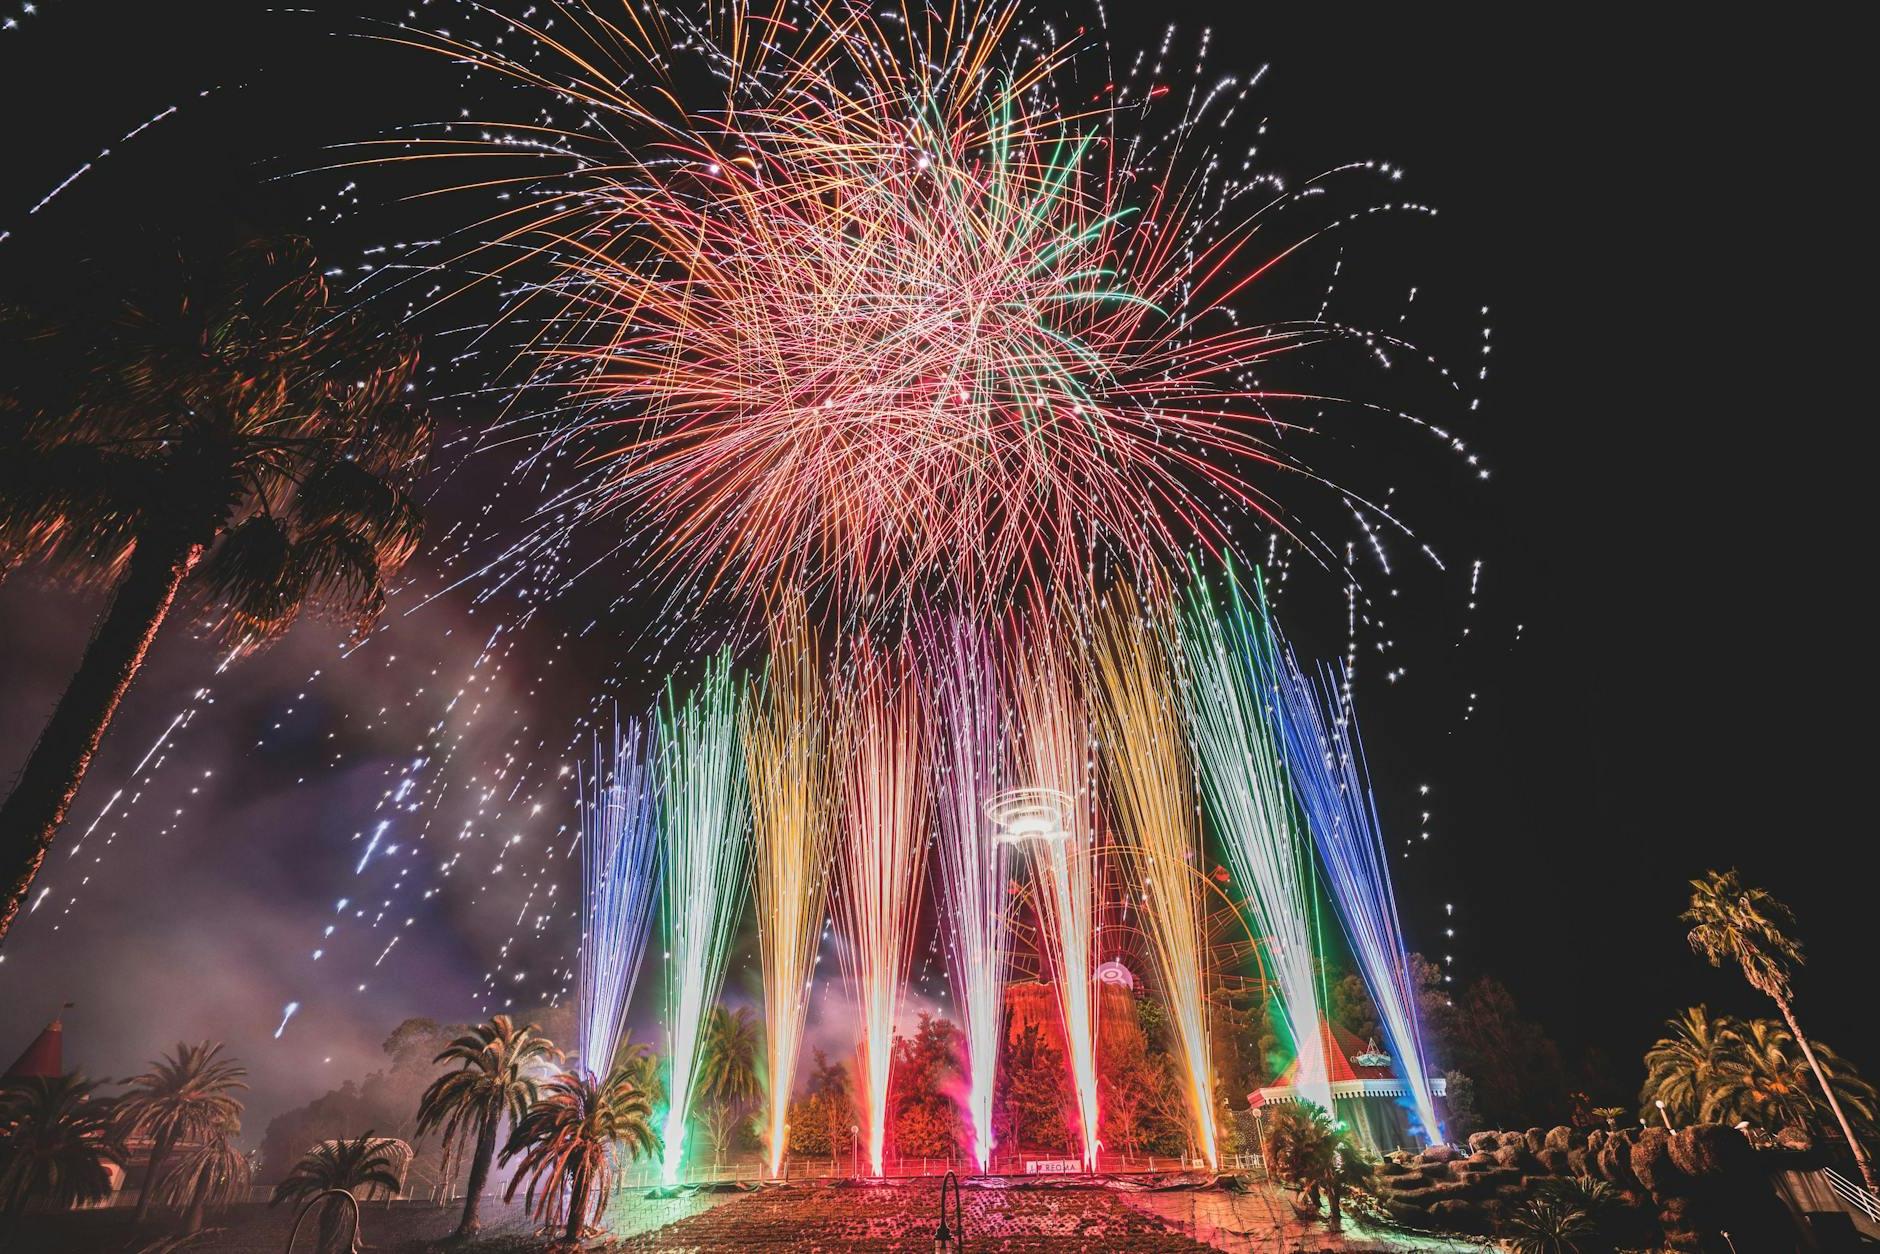 Long exposure of vibrant sparkling fireworks and bright multi colored Roman candles over palms and pavement at night